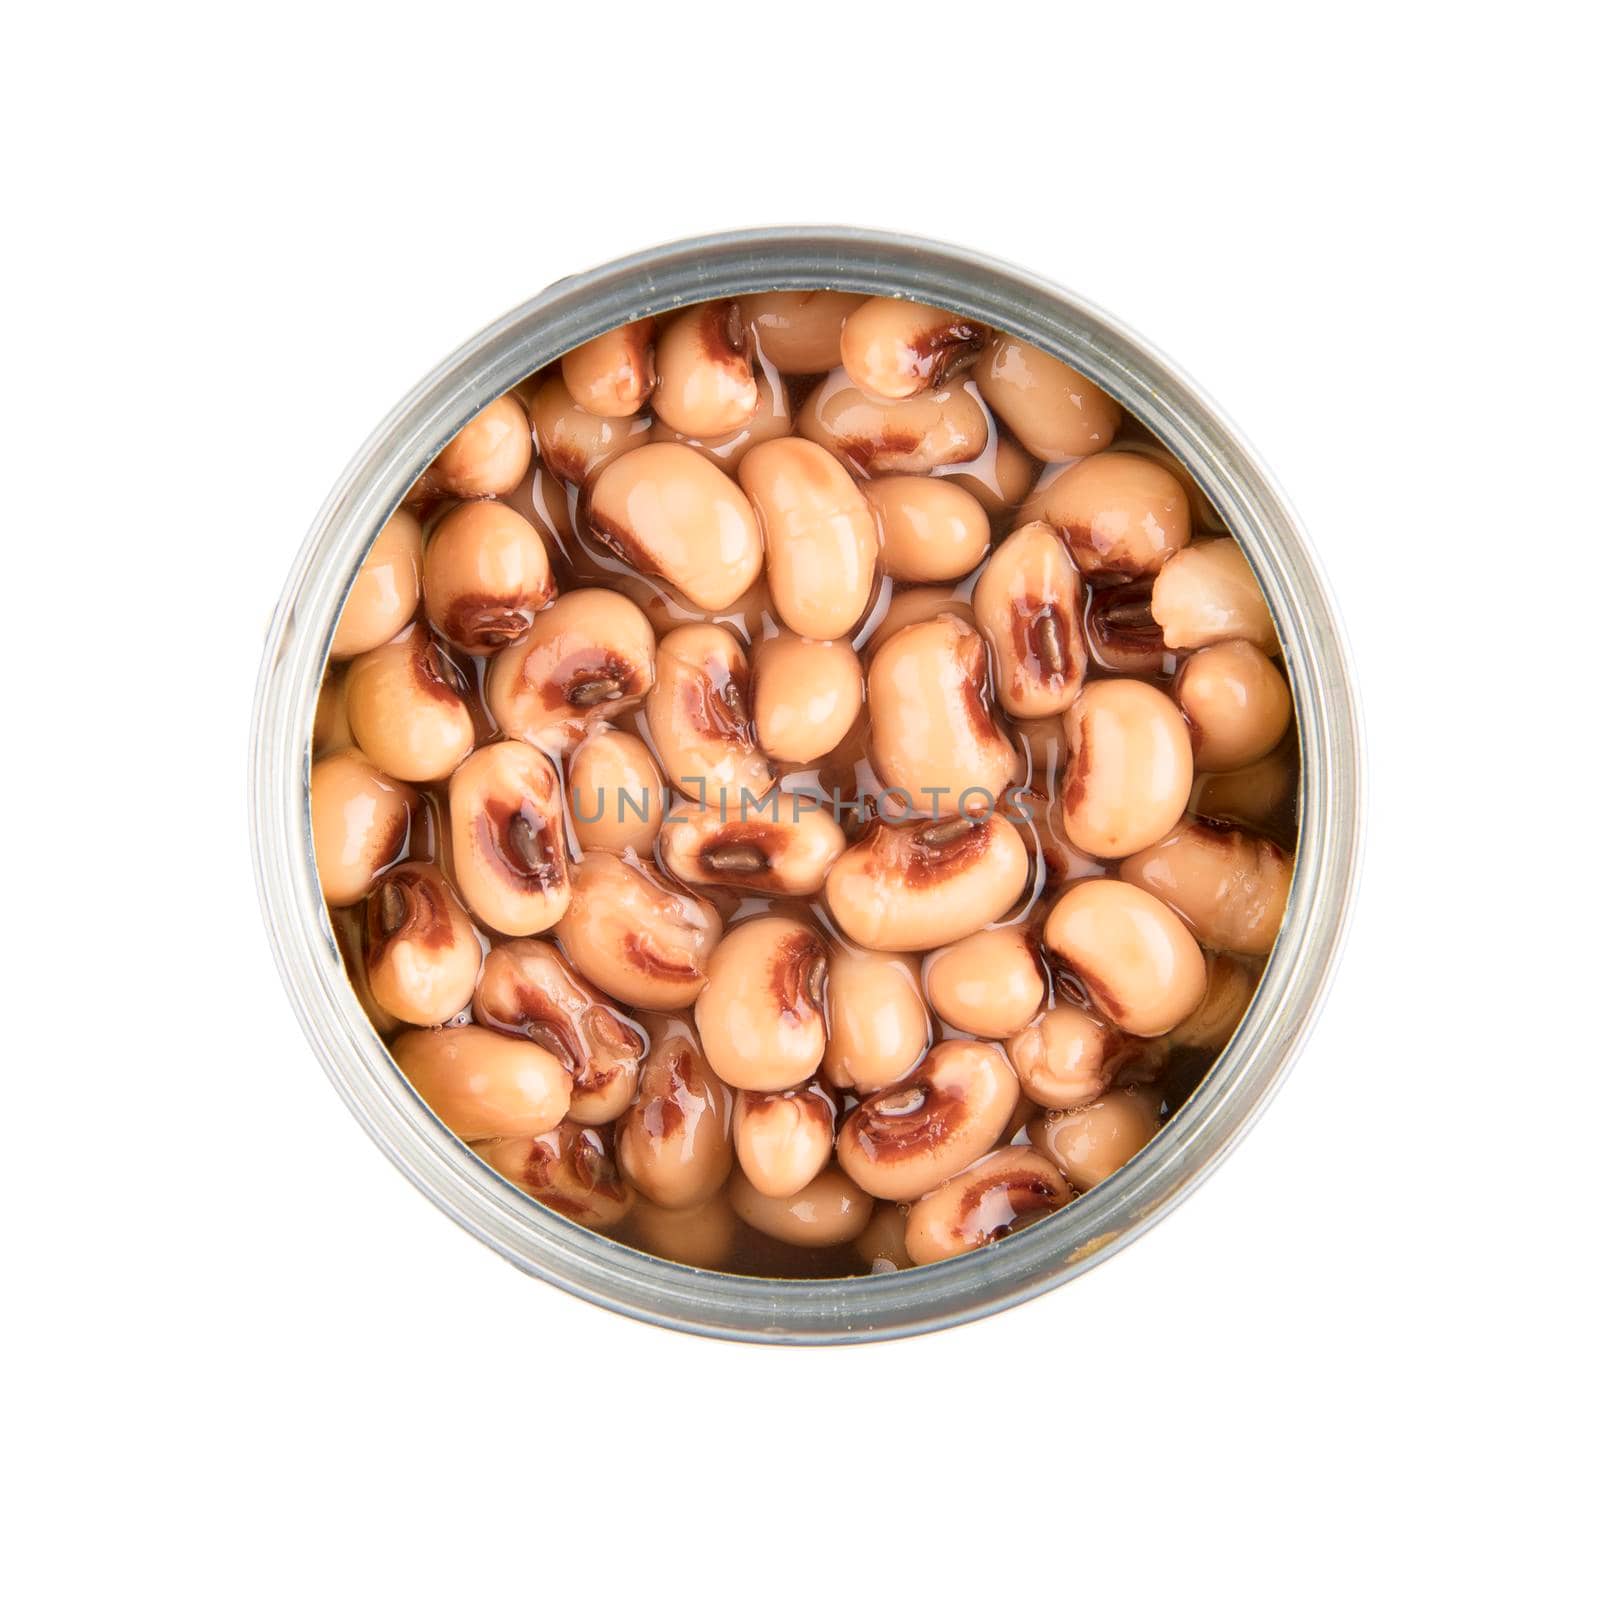 Blackeyed peas in can, isolated on white and viewed rom above.